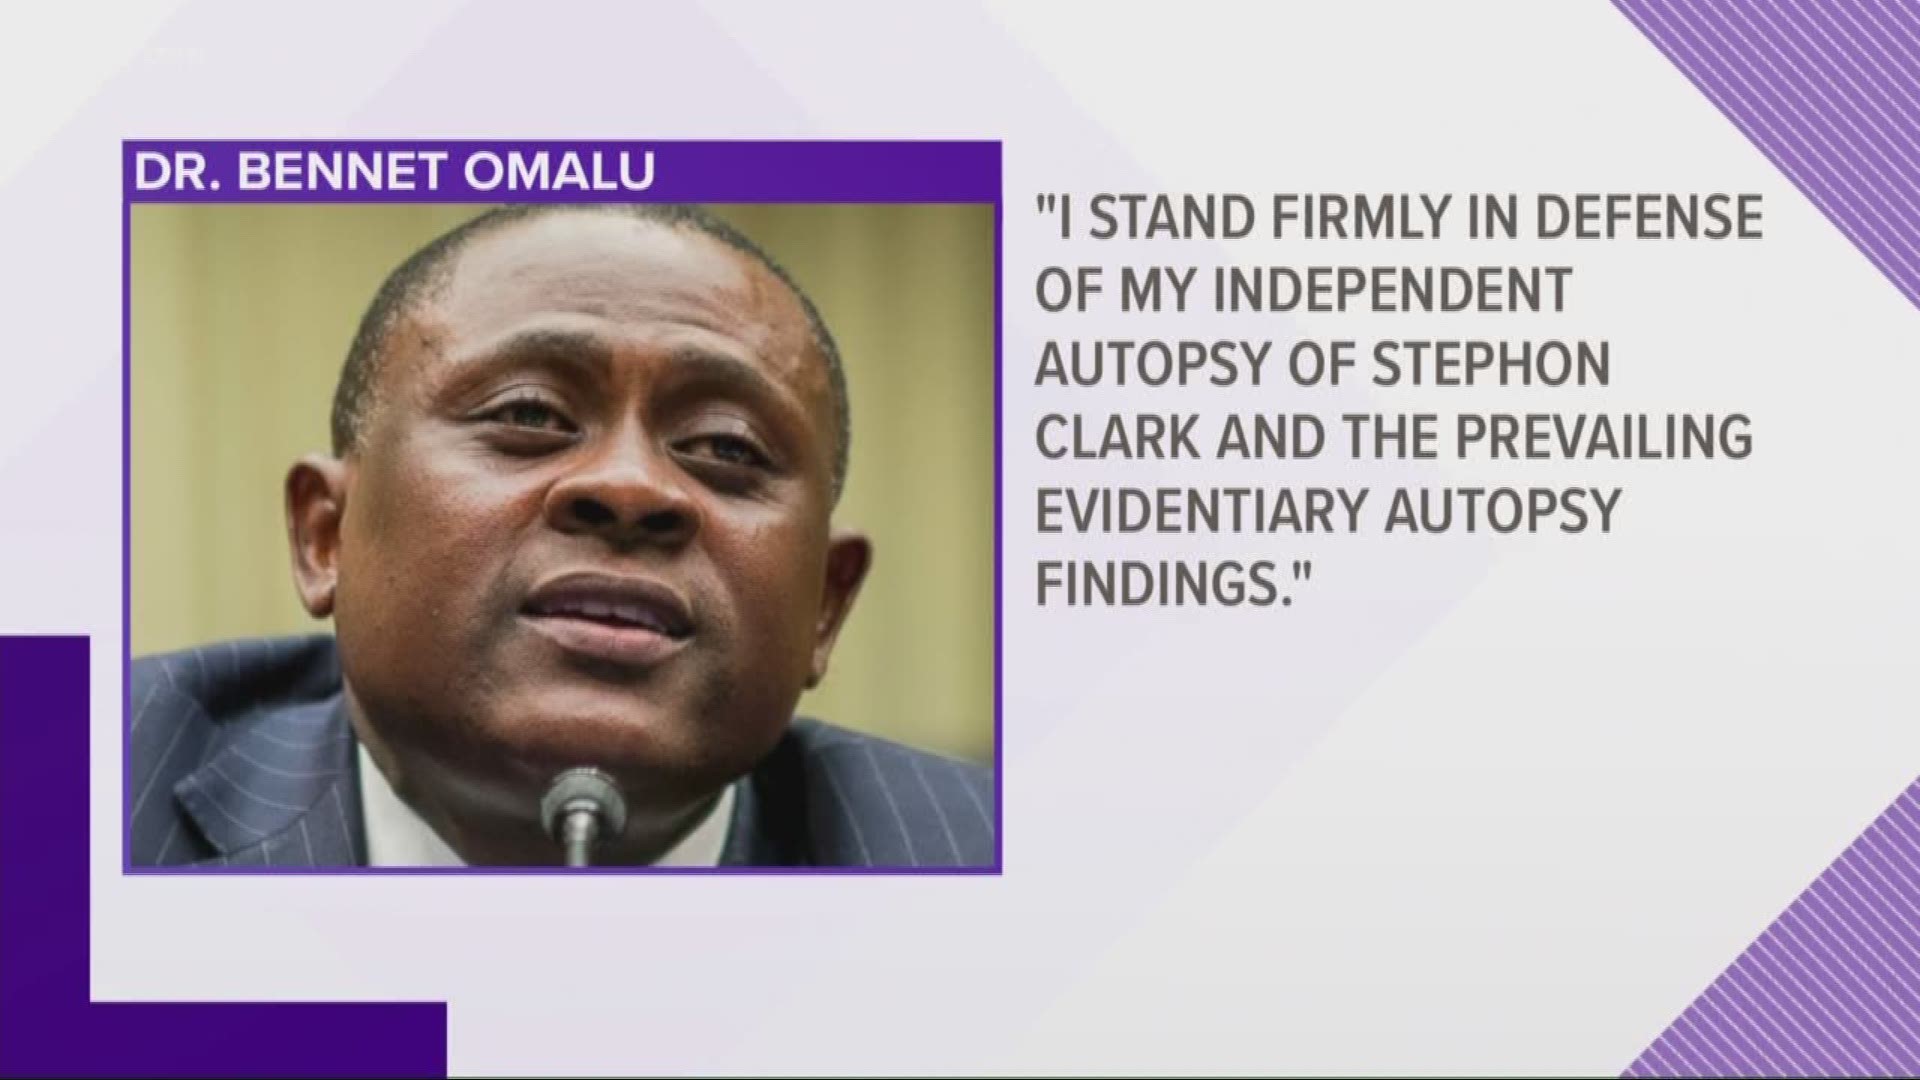 Doctor Bennet Omalu was the forensic pathologist who conducted the private autopsy that Stephon Clark's family commissioned. (May 2, 2018)